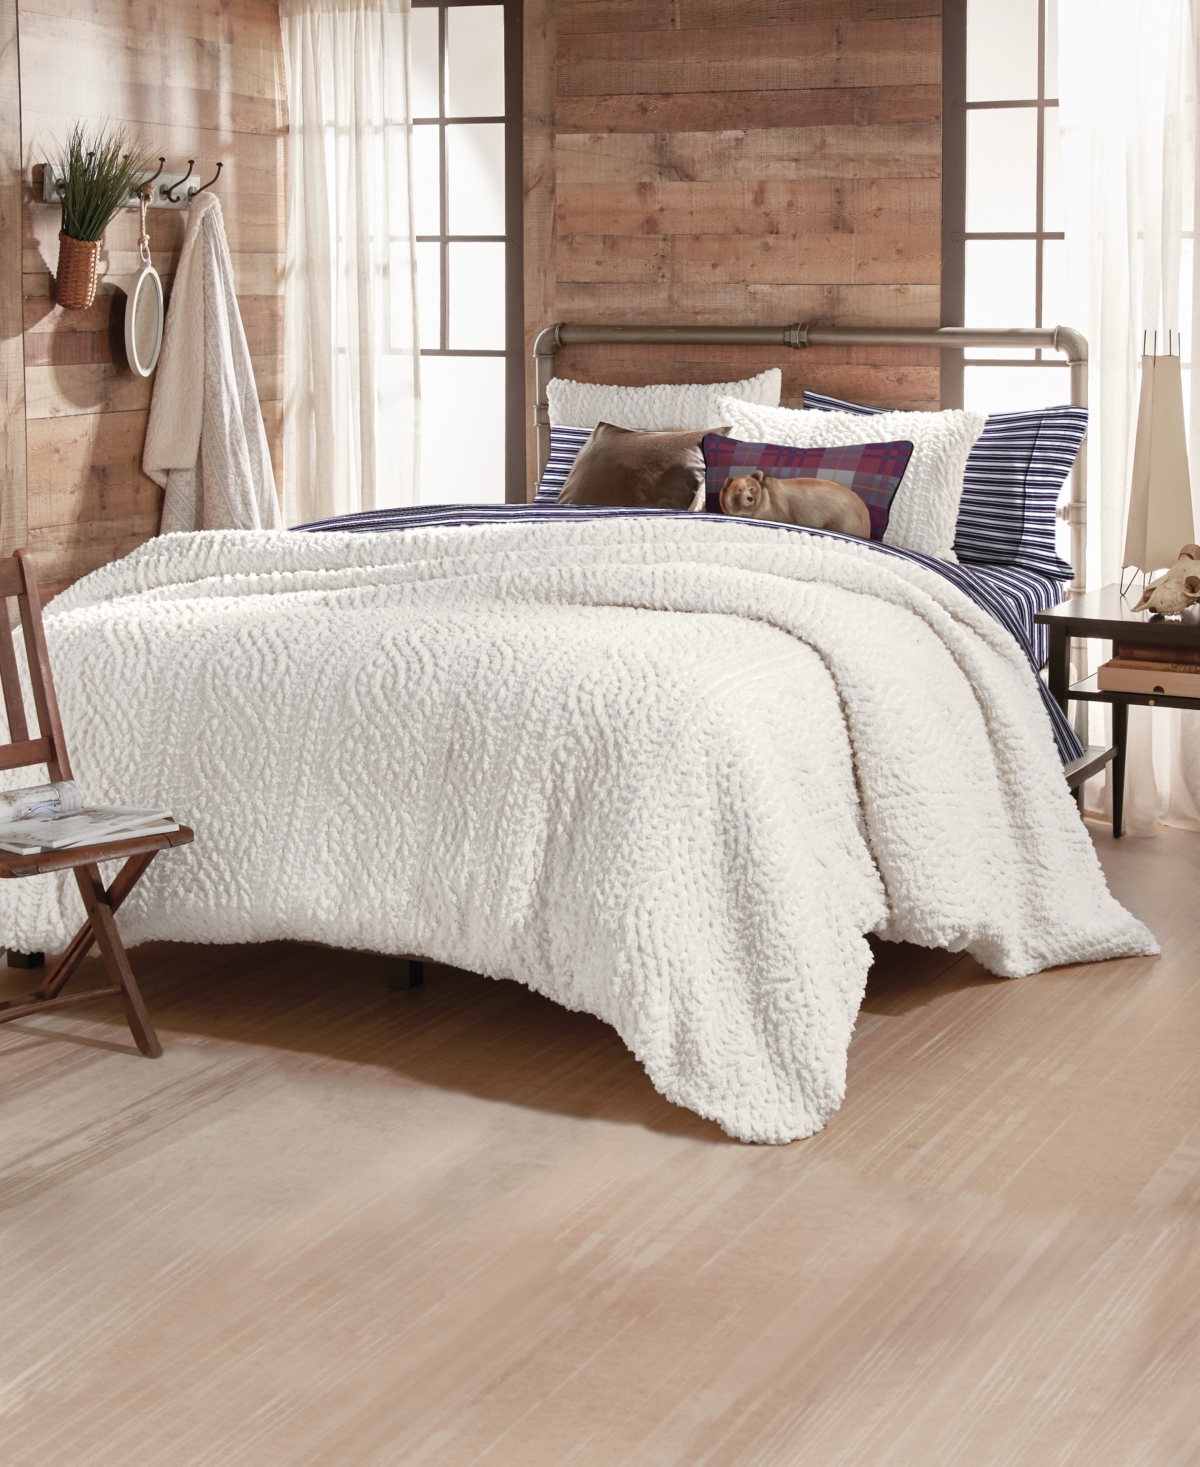 G.h Bass & Co. Cable Knit Sherpa Comforter Set, King Bedding